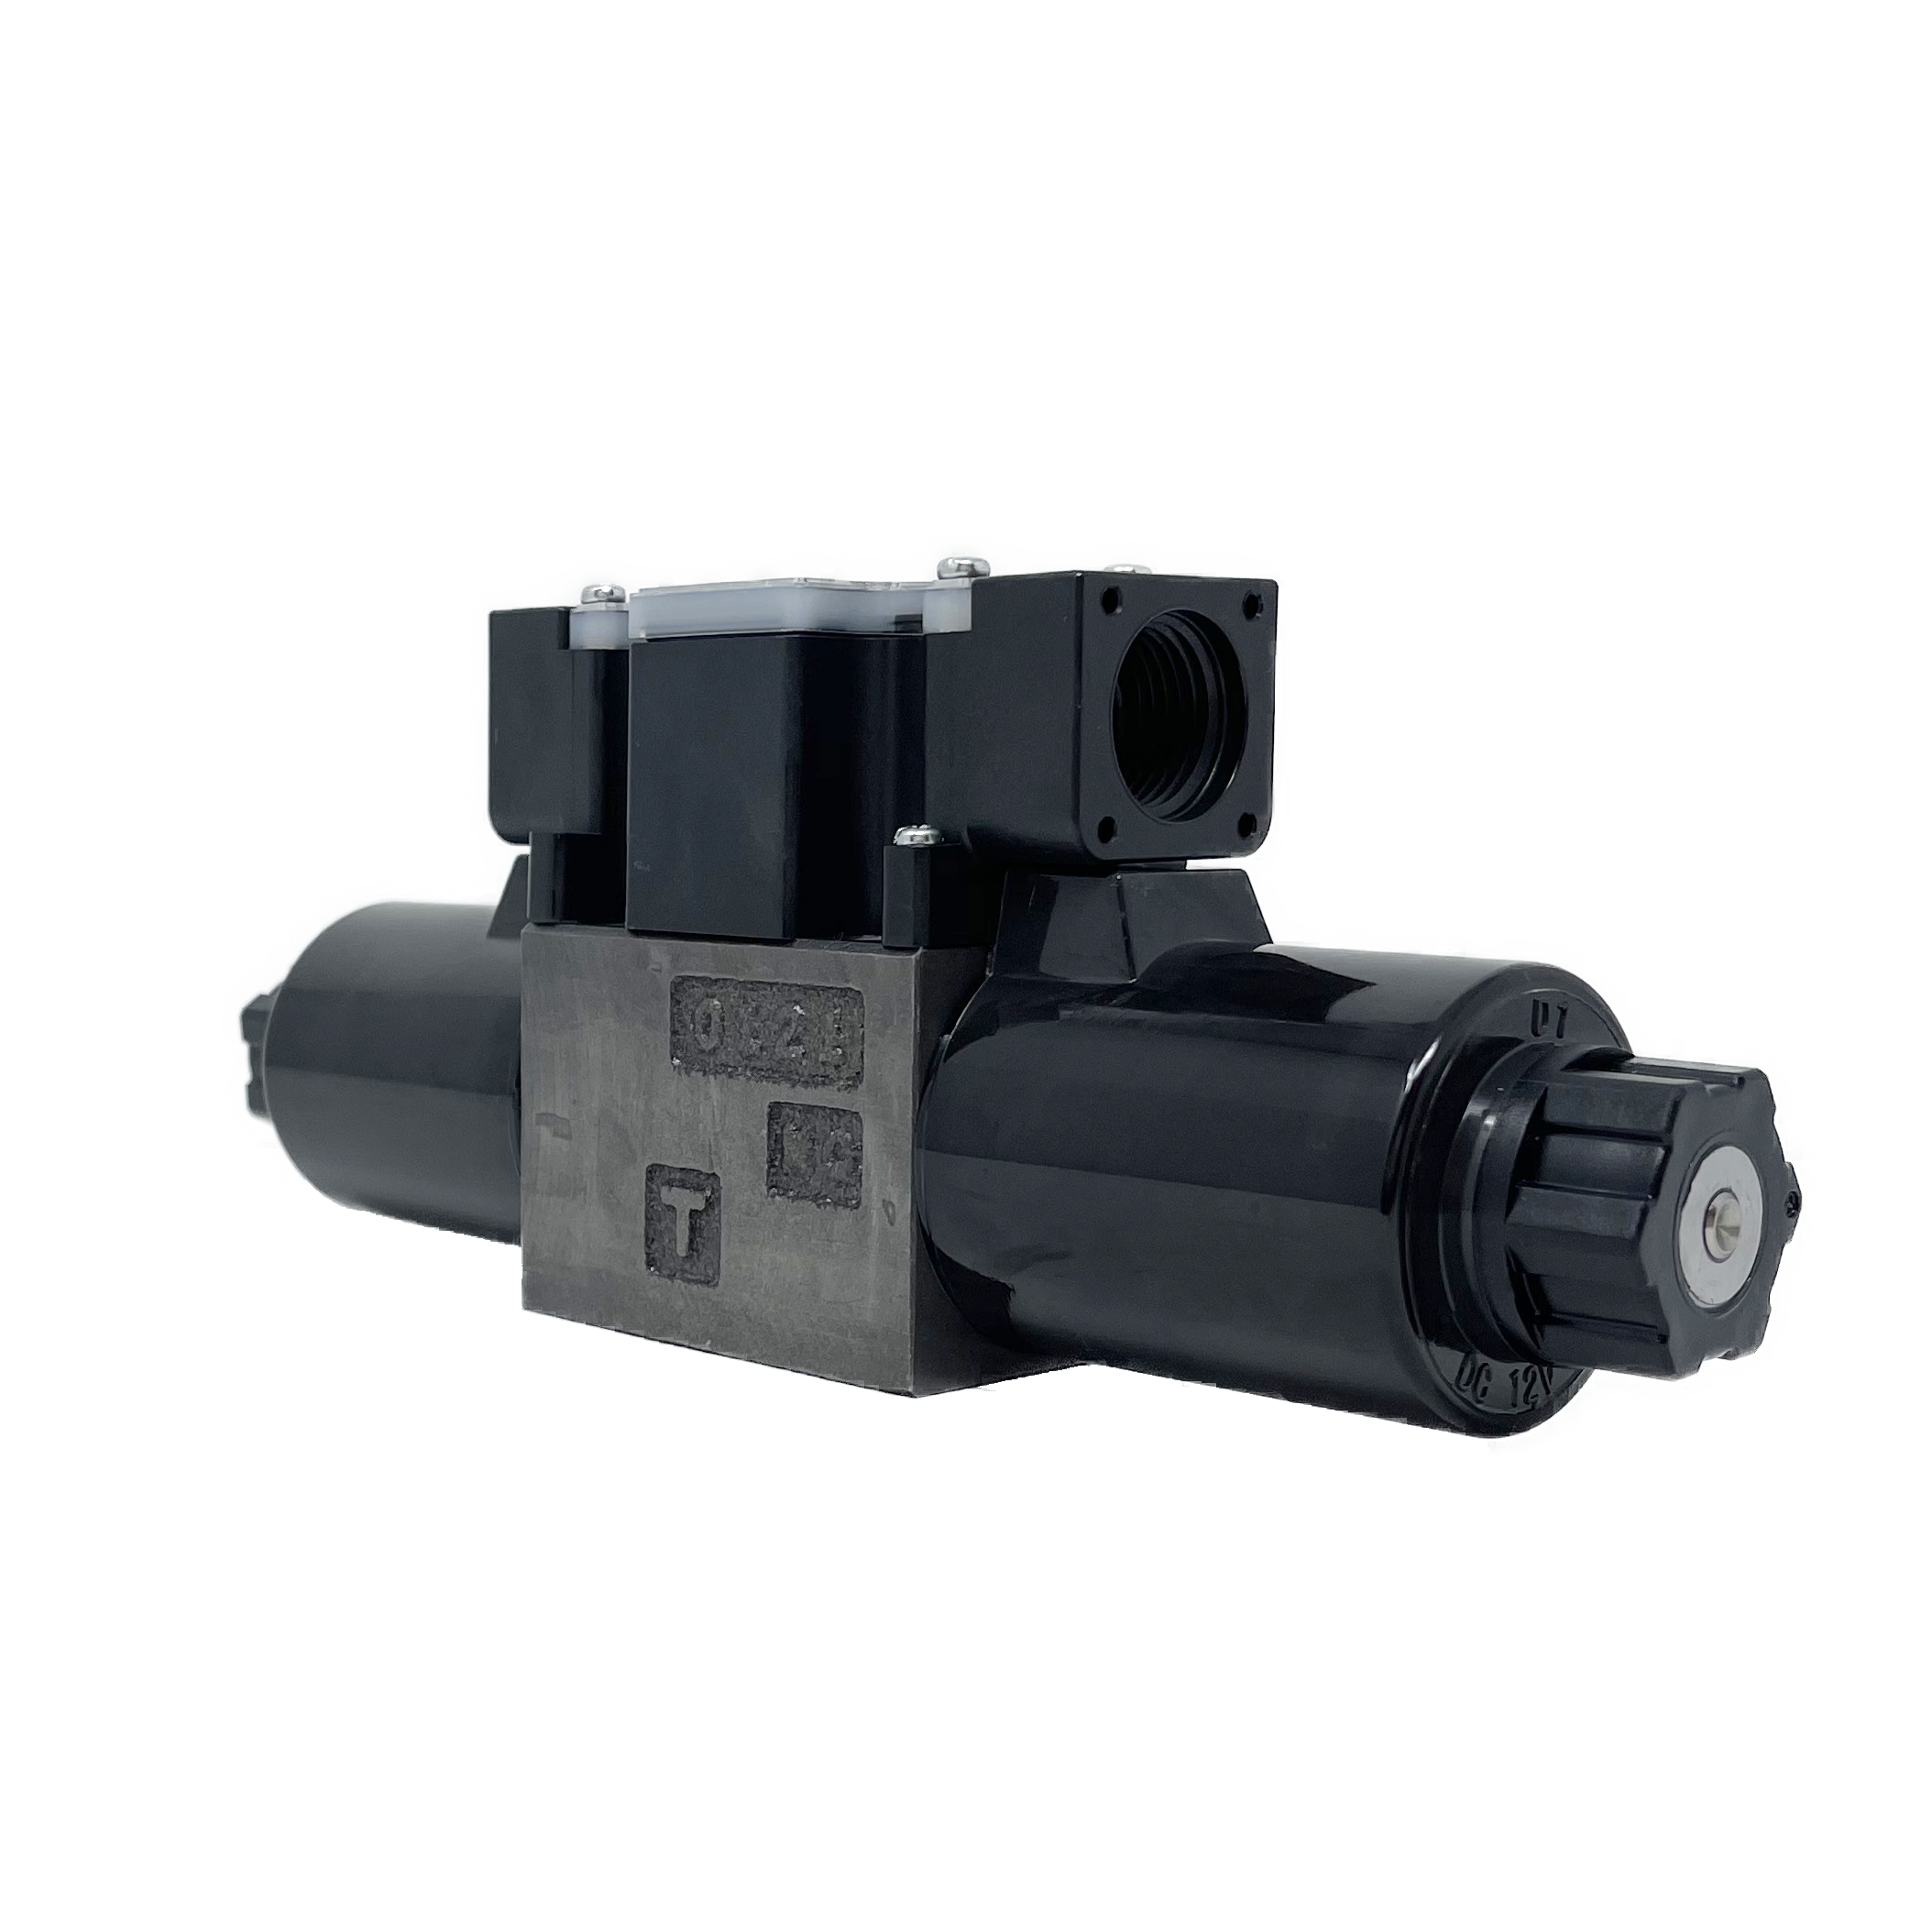 SS-G01-C5-R-D2-E31 : Nachi Solenoid Valve, 3P4W, D03 (NG6), 26.4GPM, 5075psi, All Ports Blocked Neutral, 24 VDC, Wiring Box with Lights